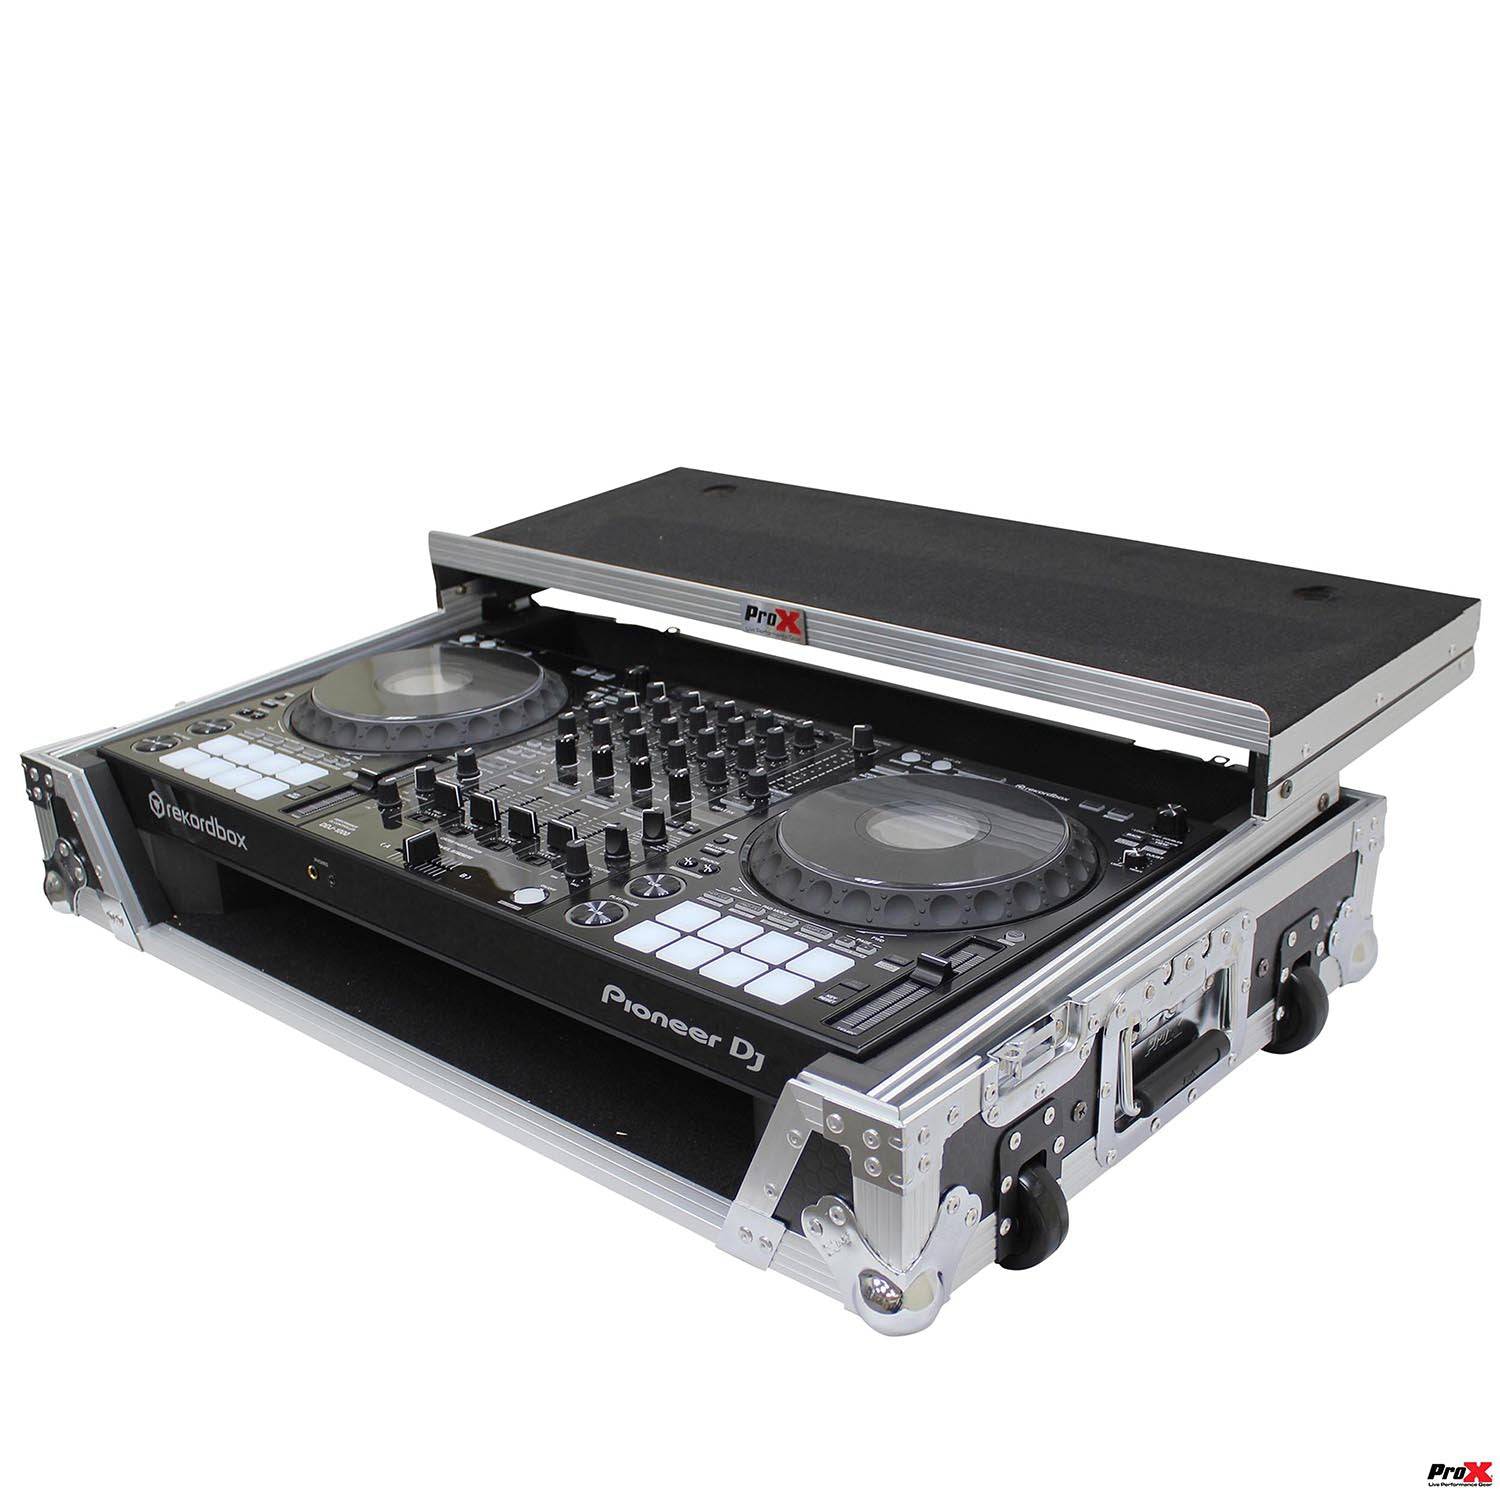 ProX XS-DDJ1000 WLT LED  Flight Case For Pioneer DDJ-1000 and SRT Series Digital Controllers With LED, Sliding Laptop Shelf And Wheels - Hollywood DJ